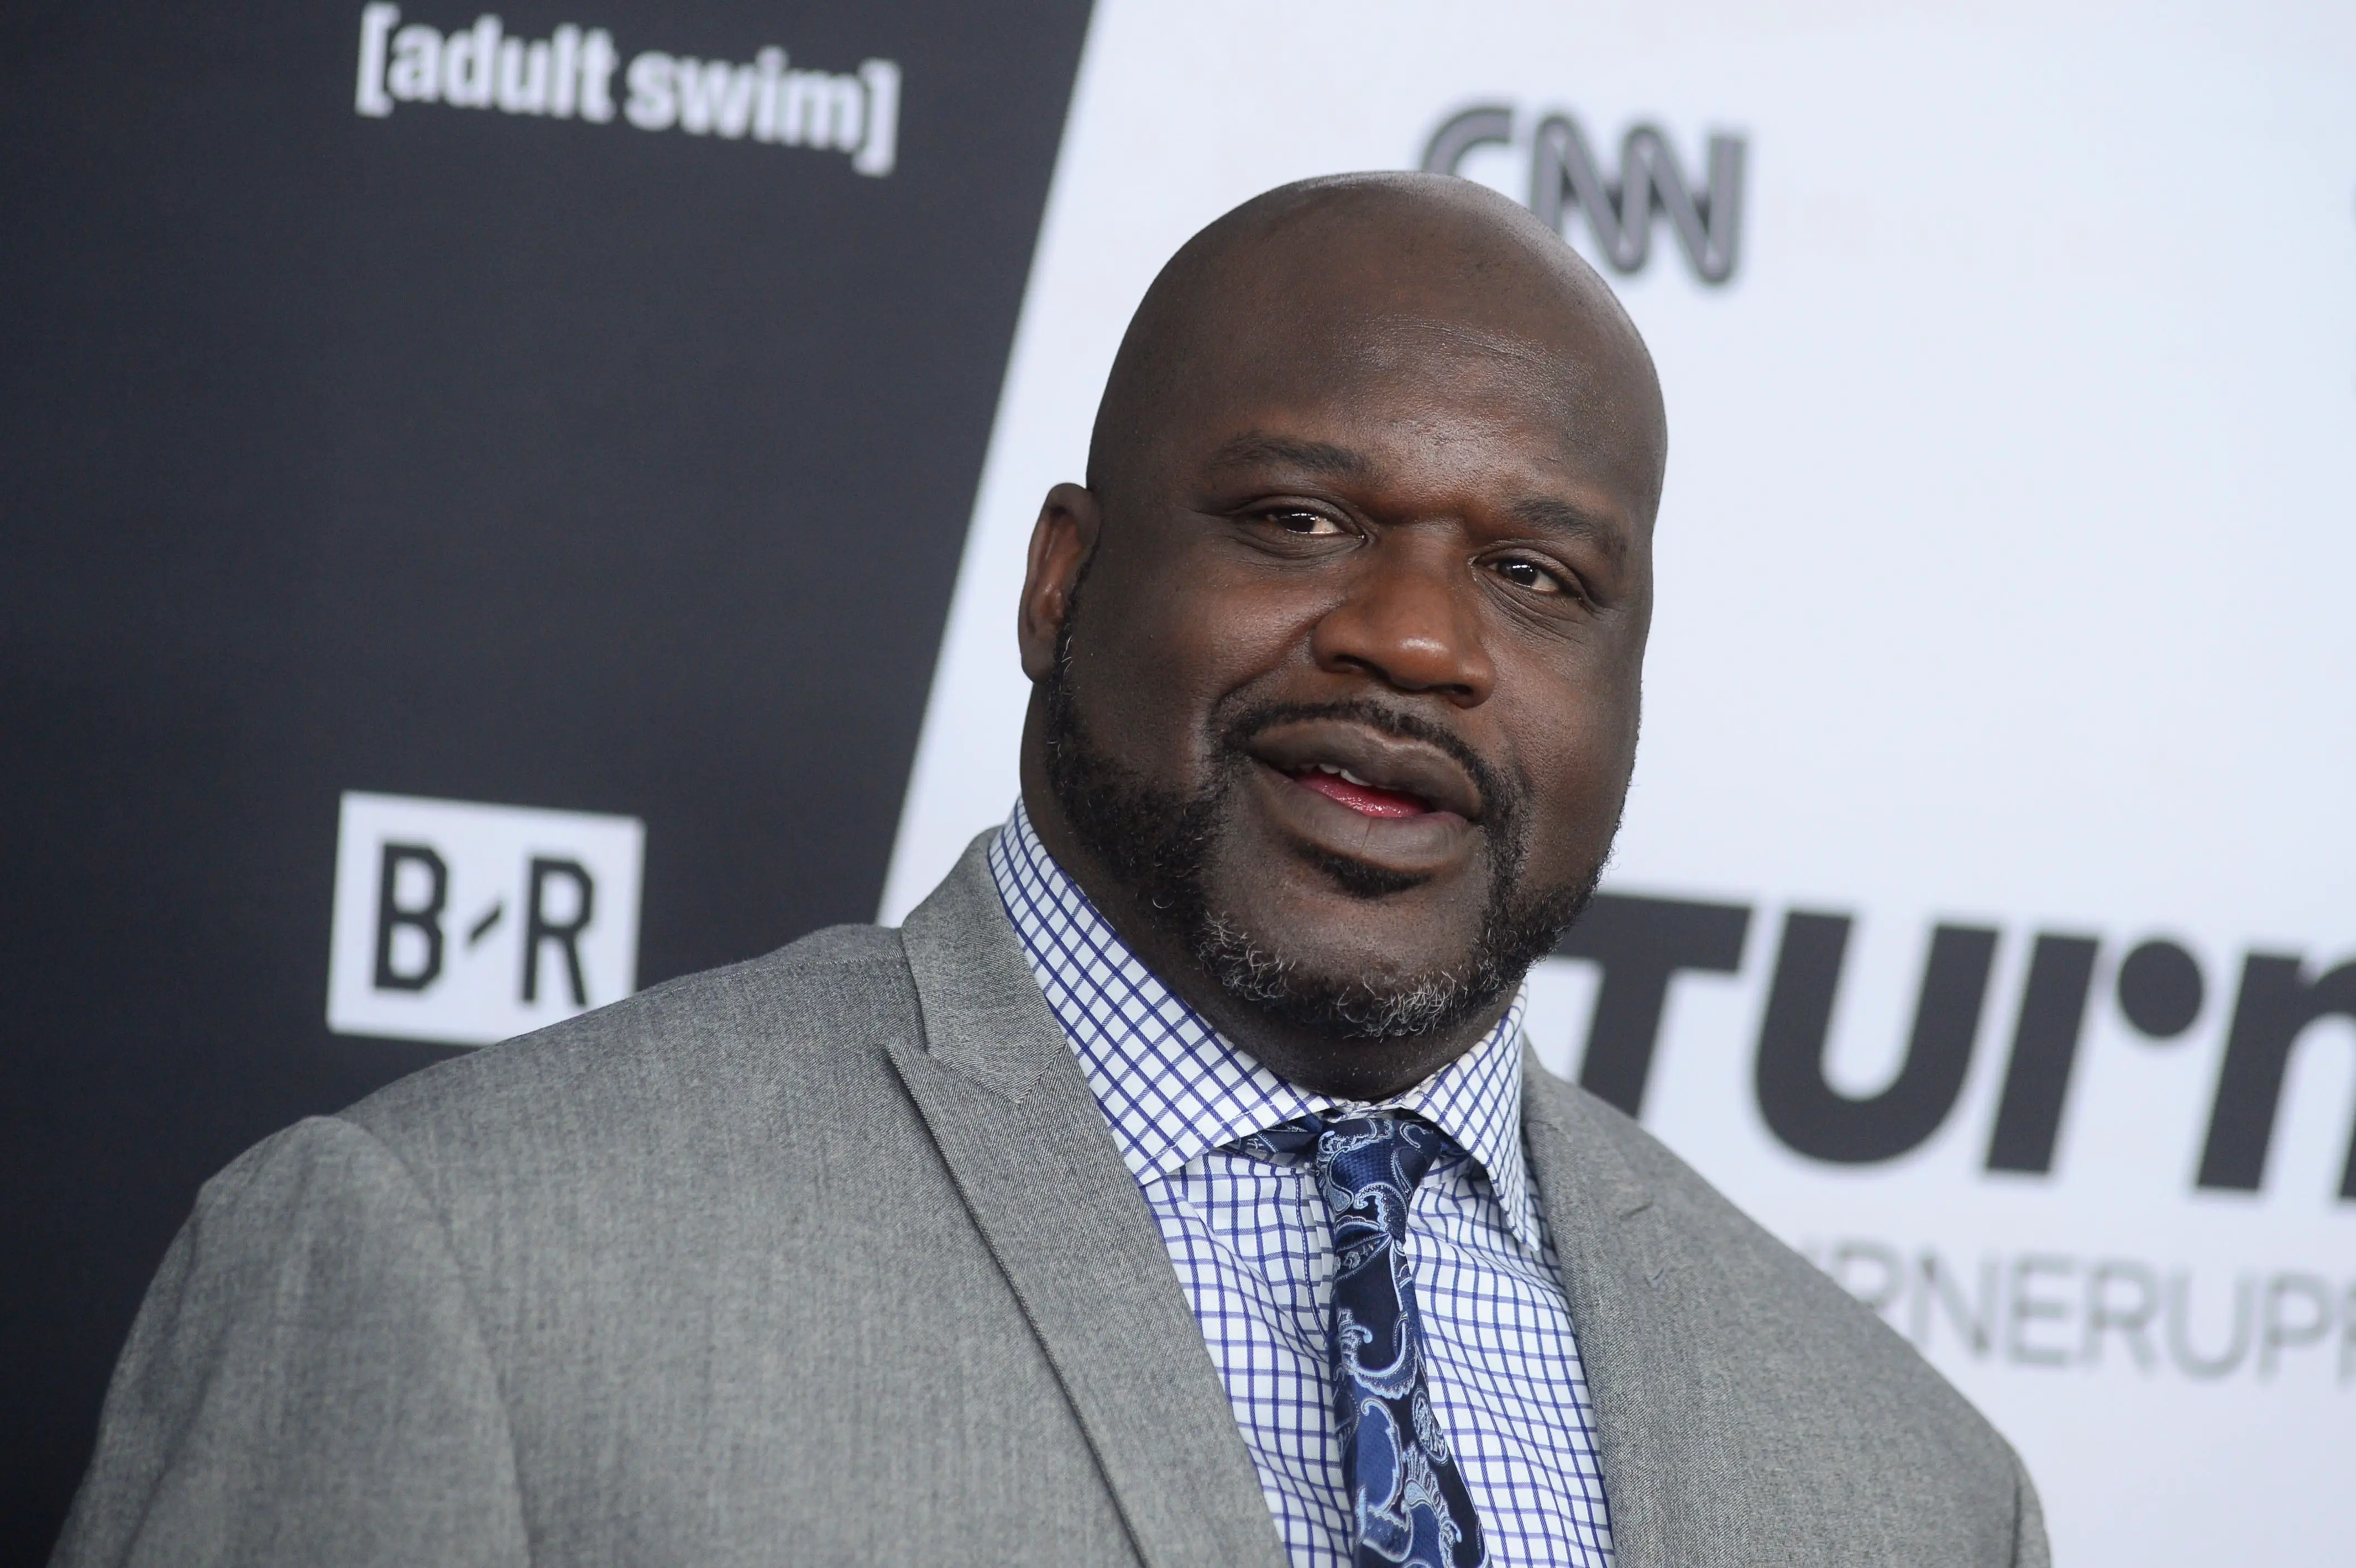 Hong Kong protests: Shaquille O'Neal weighs in on NBA-China spat